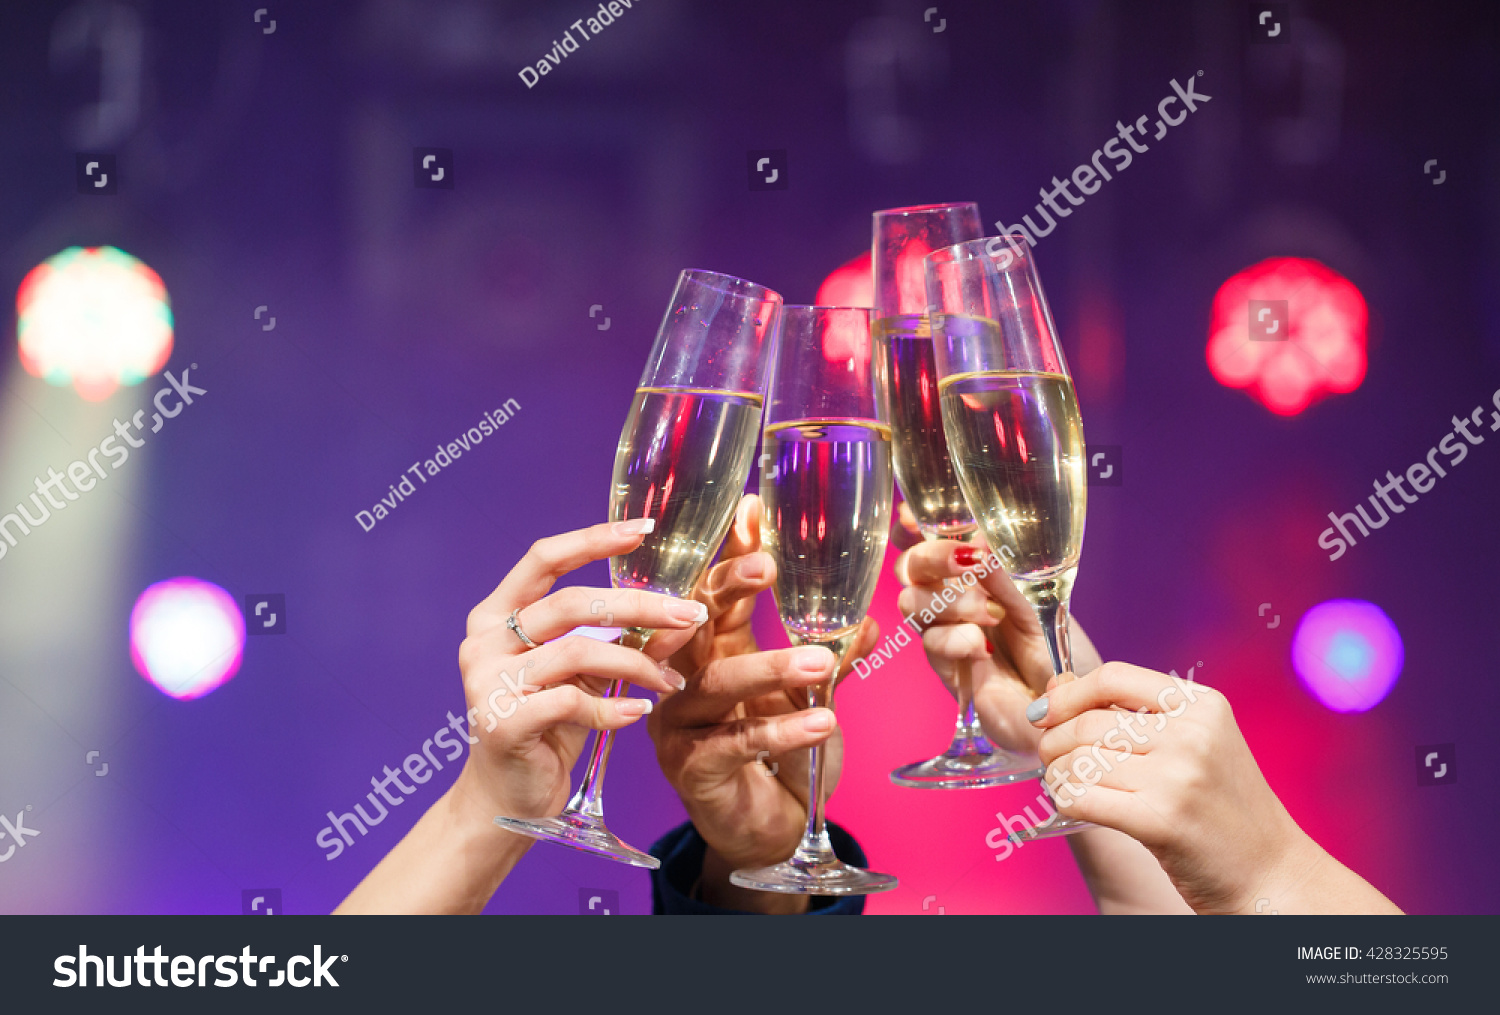 Clinking glasses of champagne in hands on bright lights background #428325595